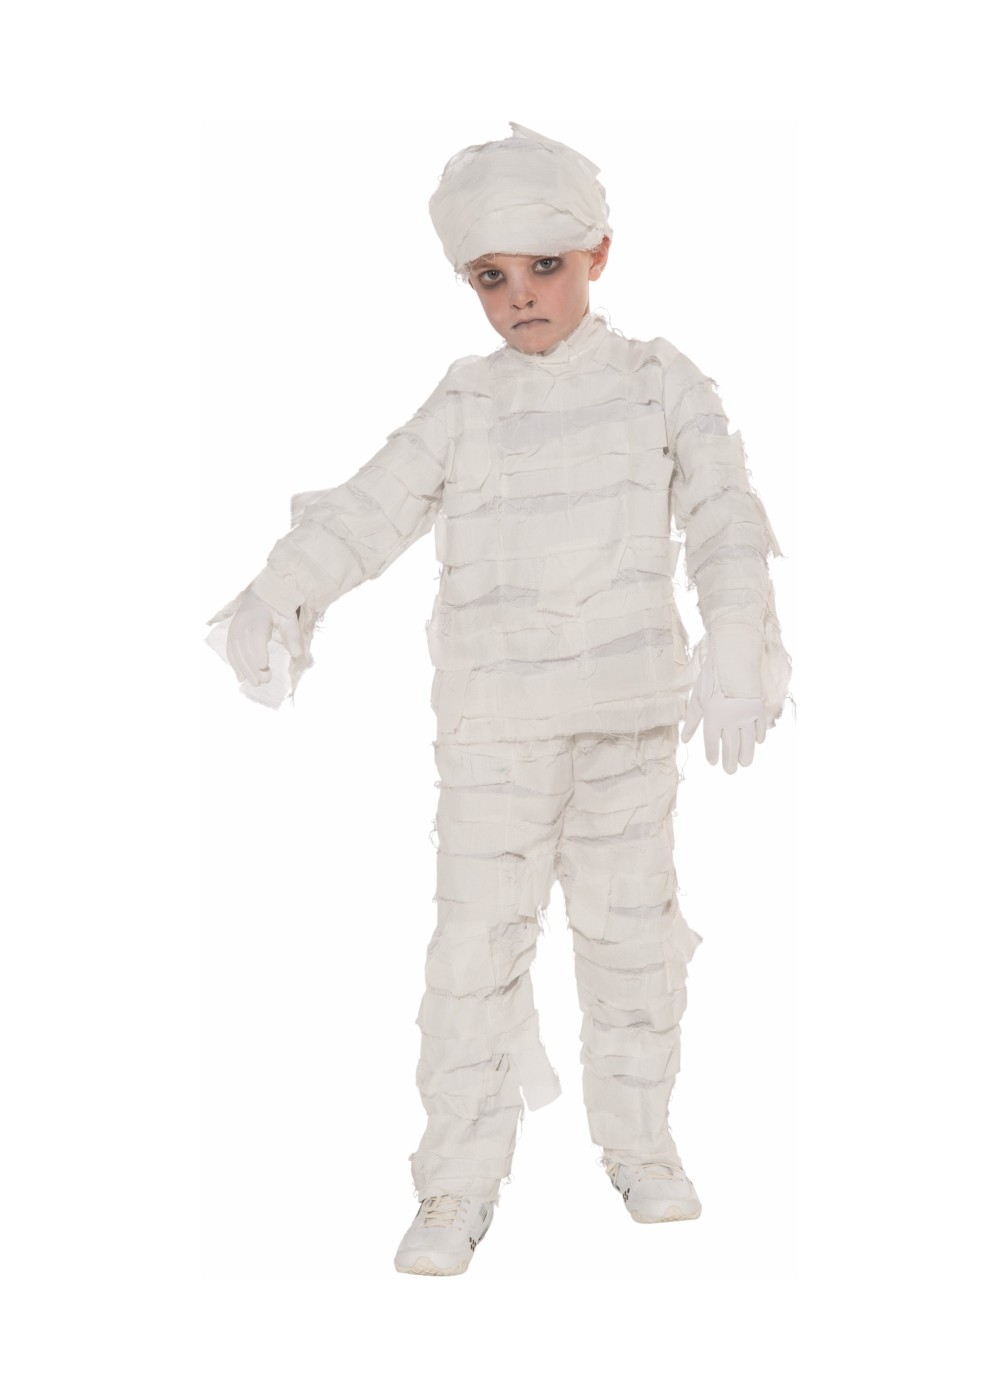 Kids Wrapped up Mummy Costume - Egyptian Costumes